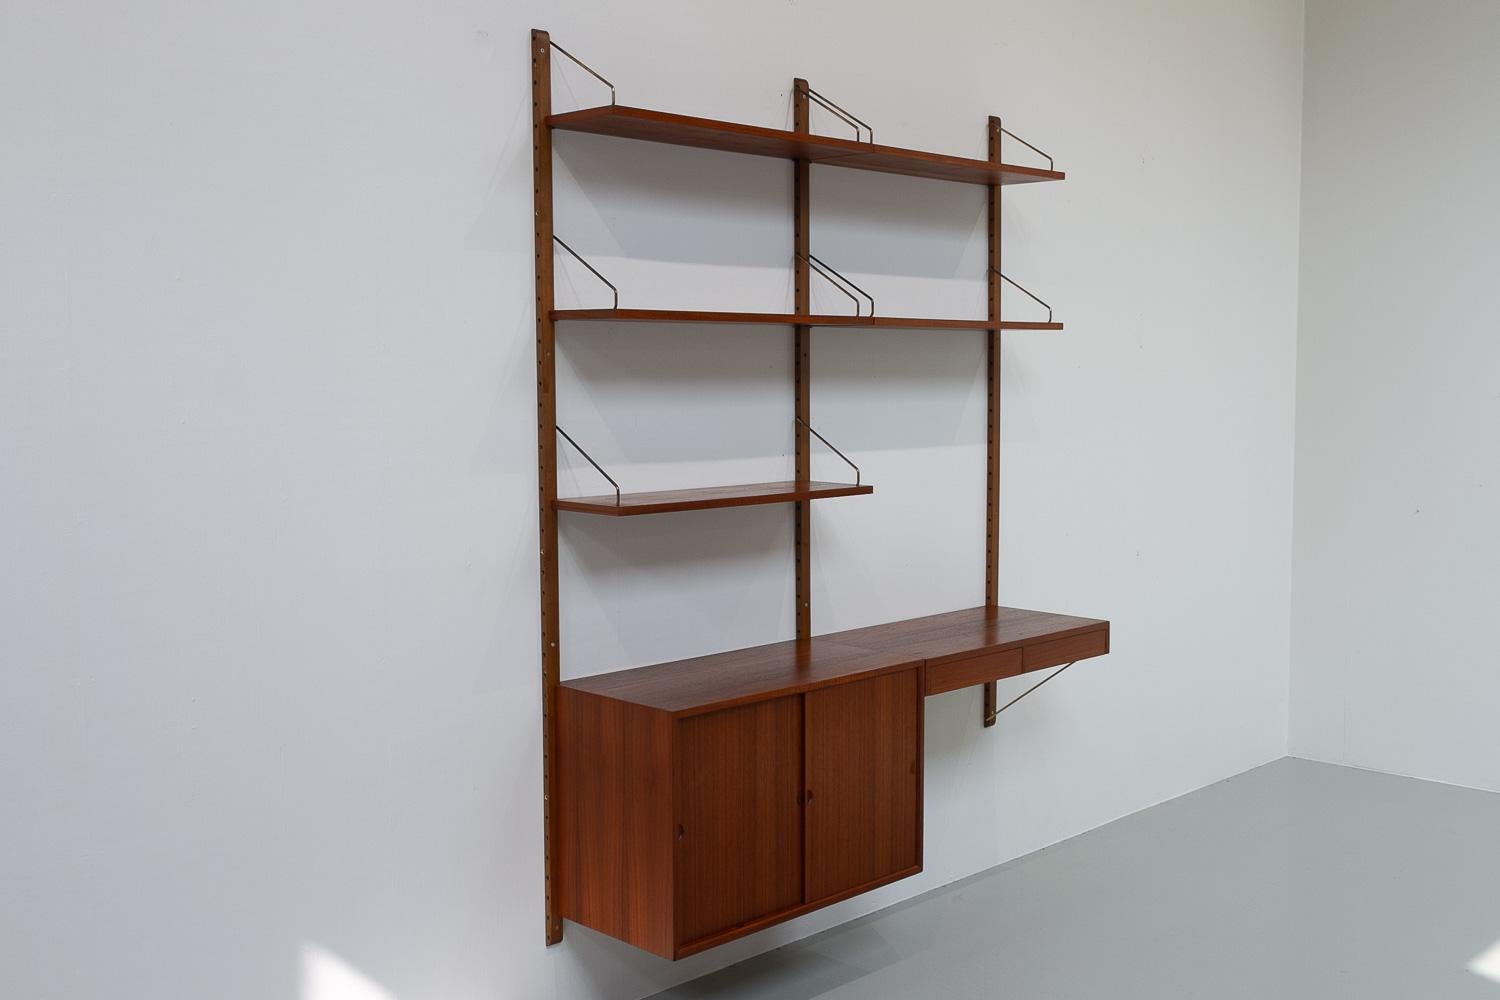 Danish Modern 2-Bay Modular Teak Wall Unit by Poul Cadovius for Cado, 1960s.

Mid-Century Modern 2 bay shelving system model Royal. This is an original vintage floating bookcase designed in 1948 by Danish architect Poul Cadovius. 
Cadovius had the